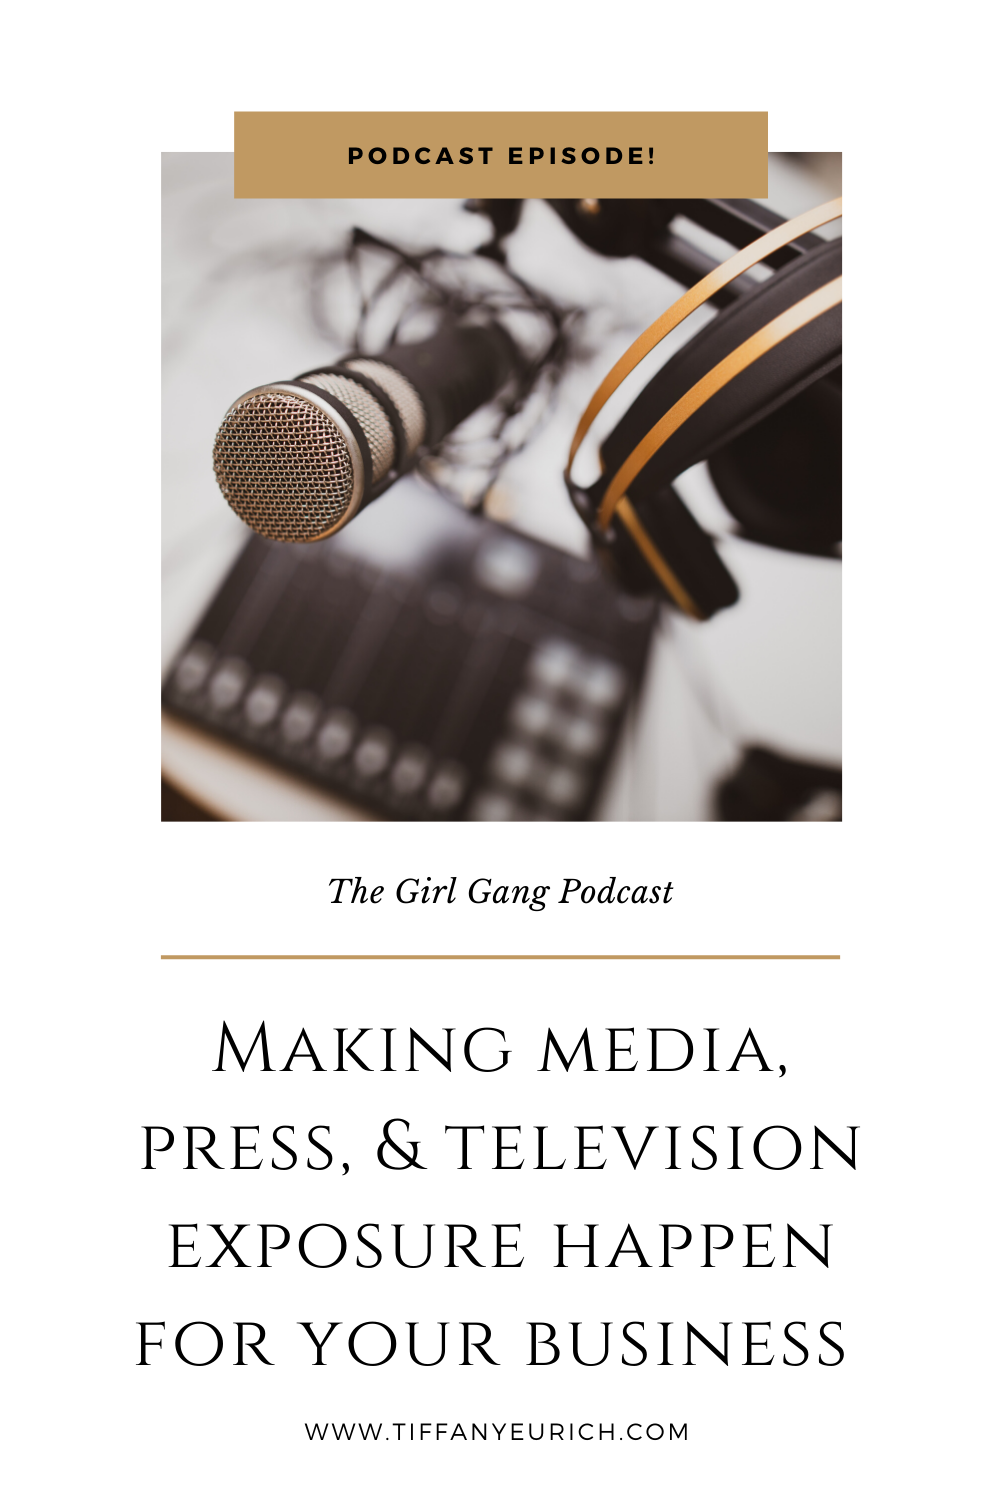 Tiffany Eurich on Girl Gang Podcast from Dallas Girl Gang on getting media and press exposure for your business